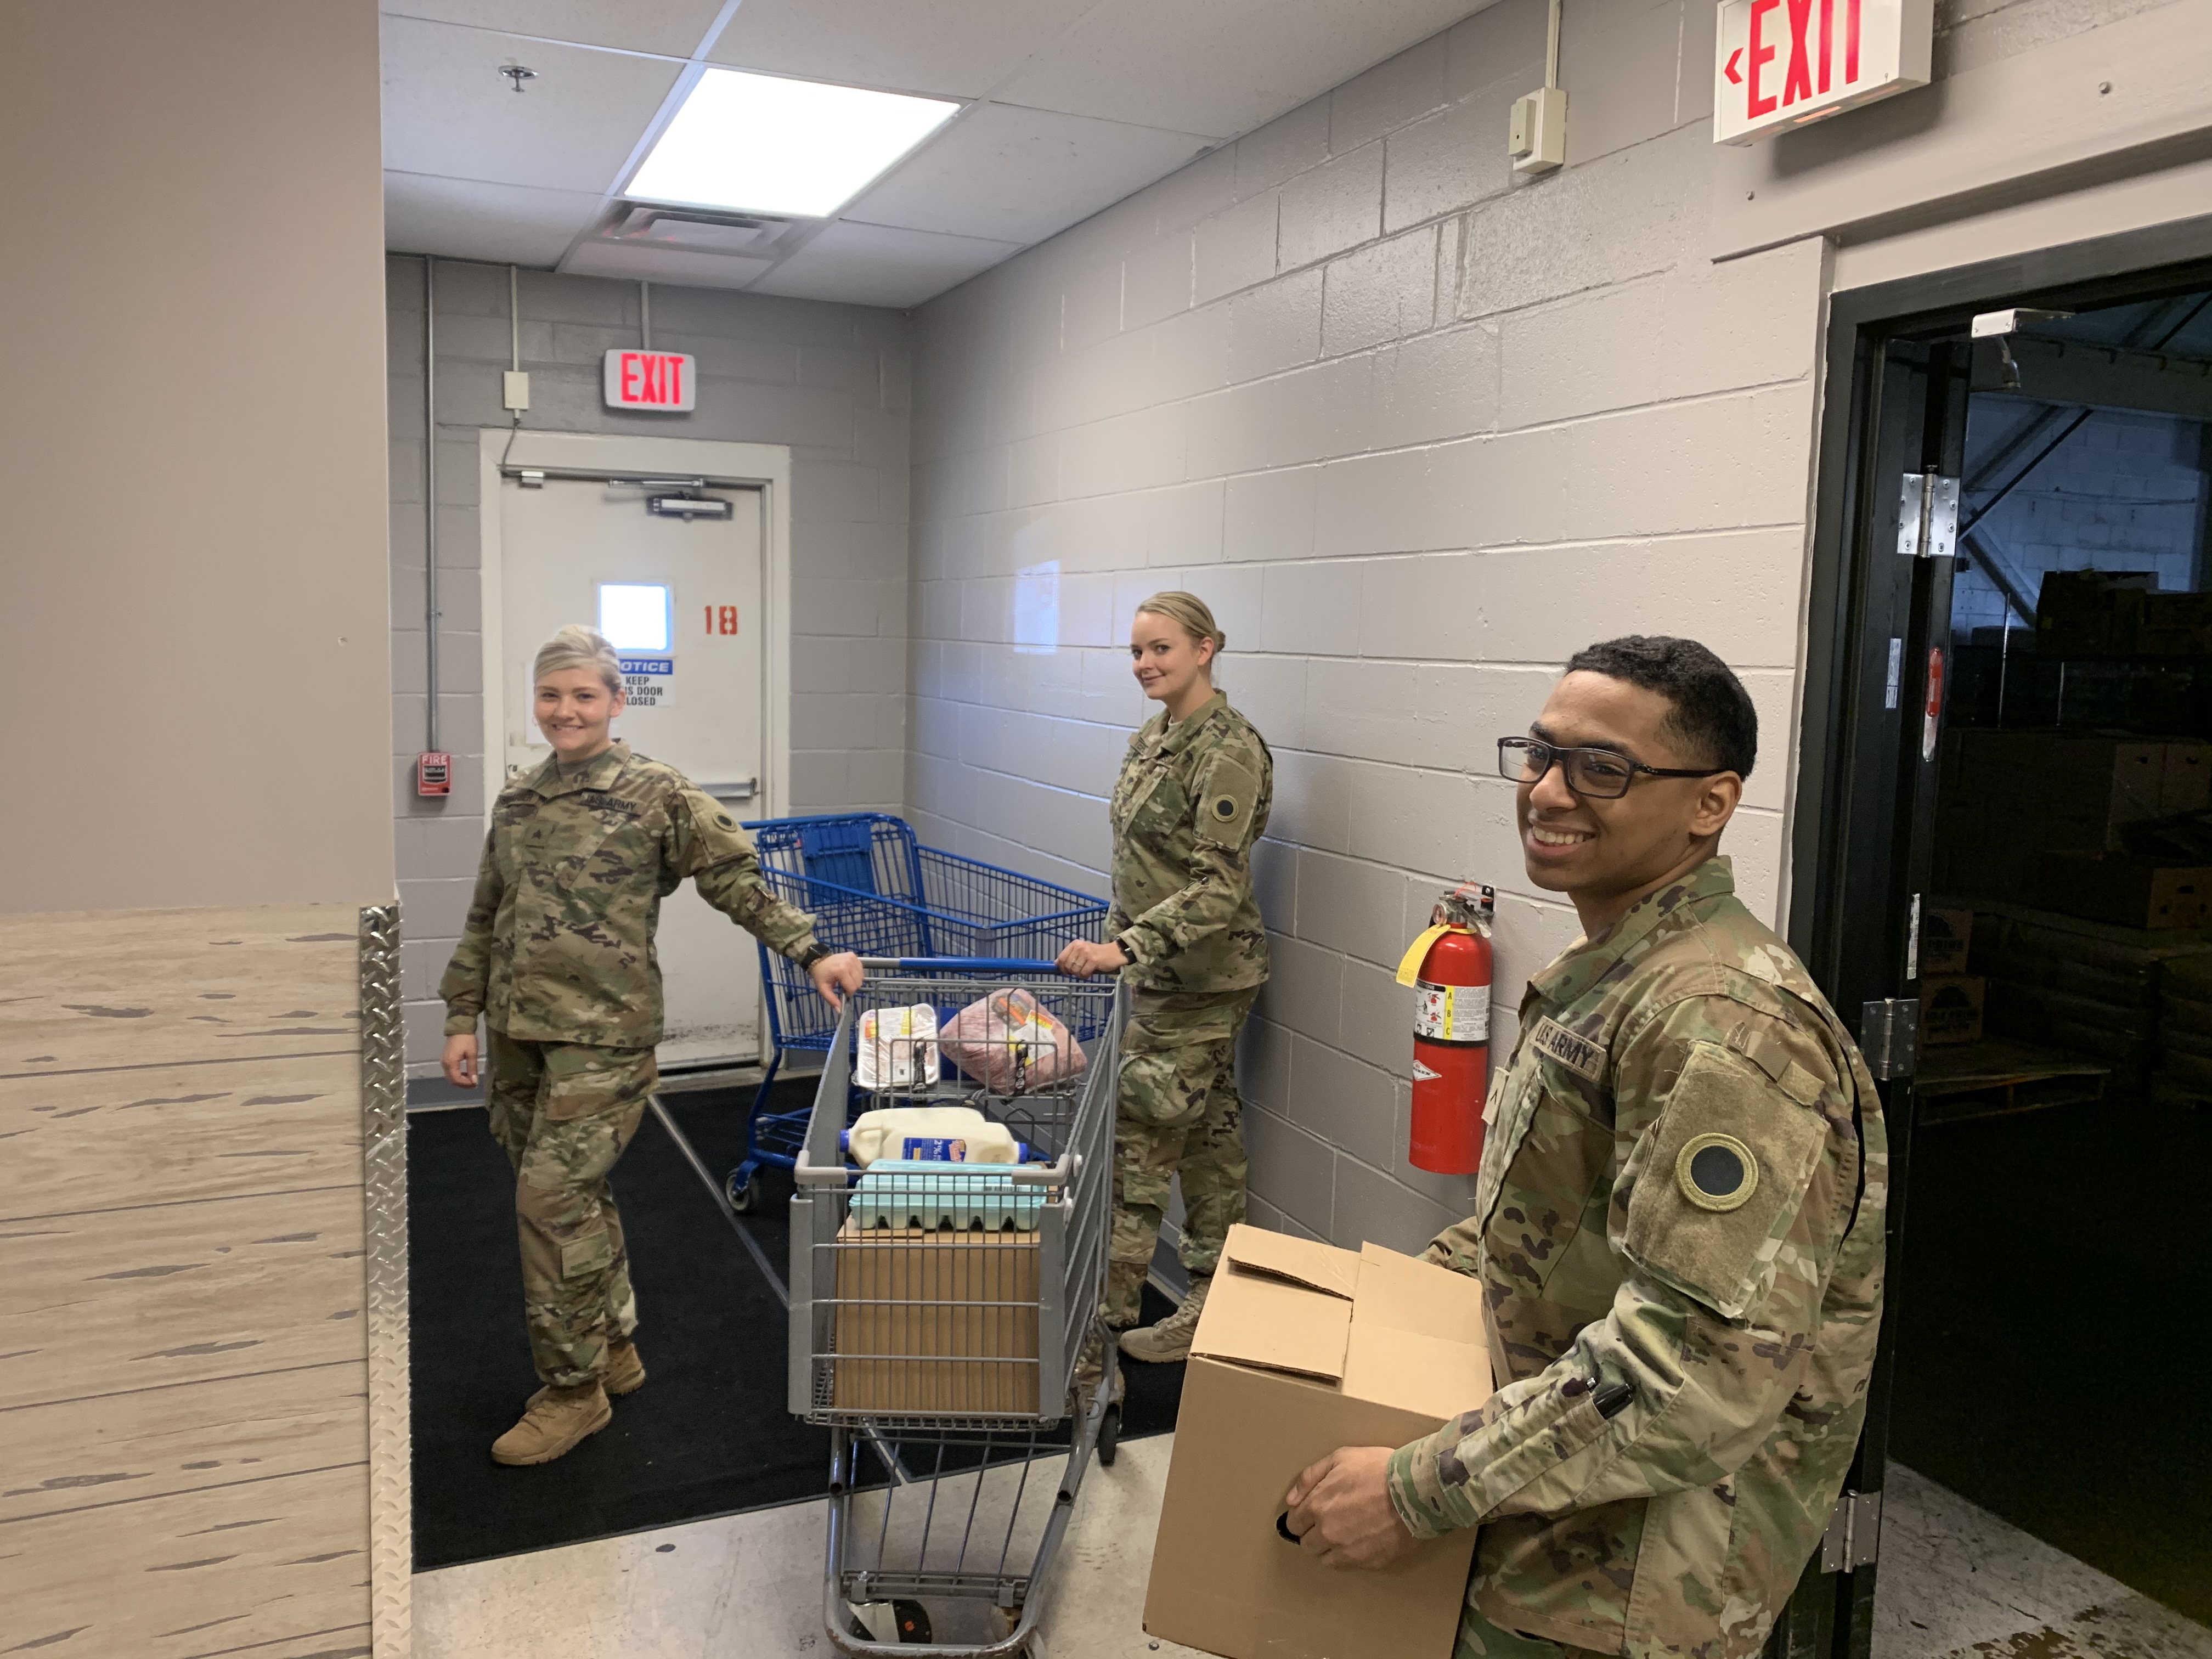 Soldiers pack carts in warehouse.